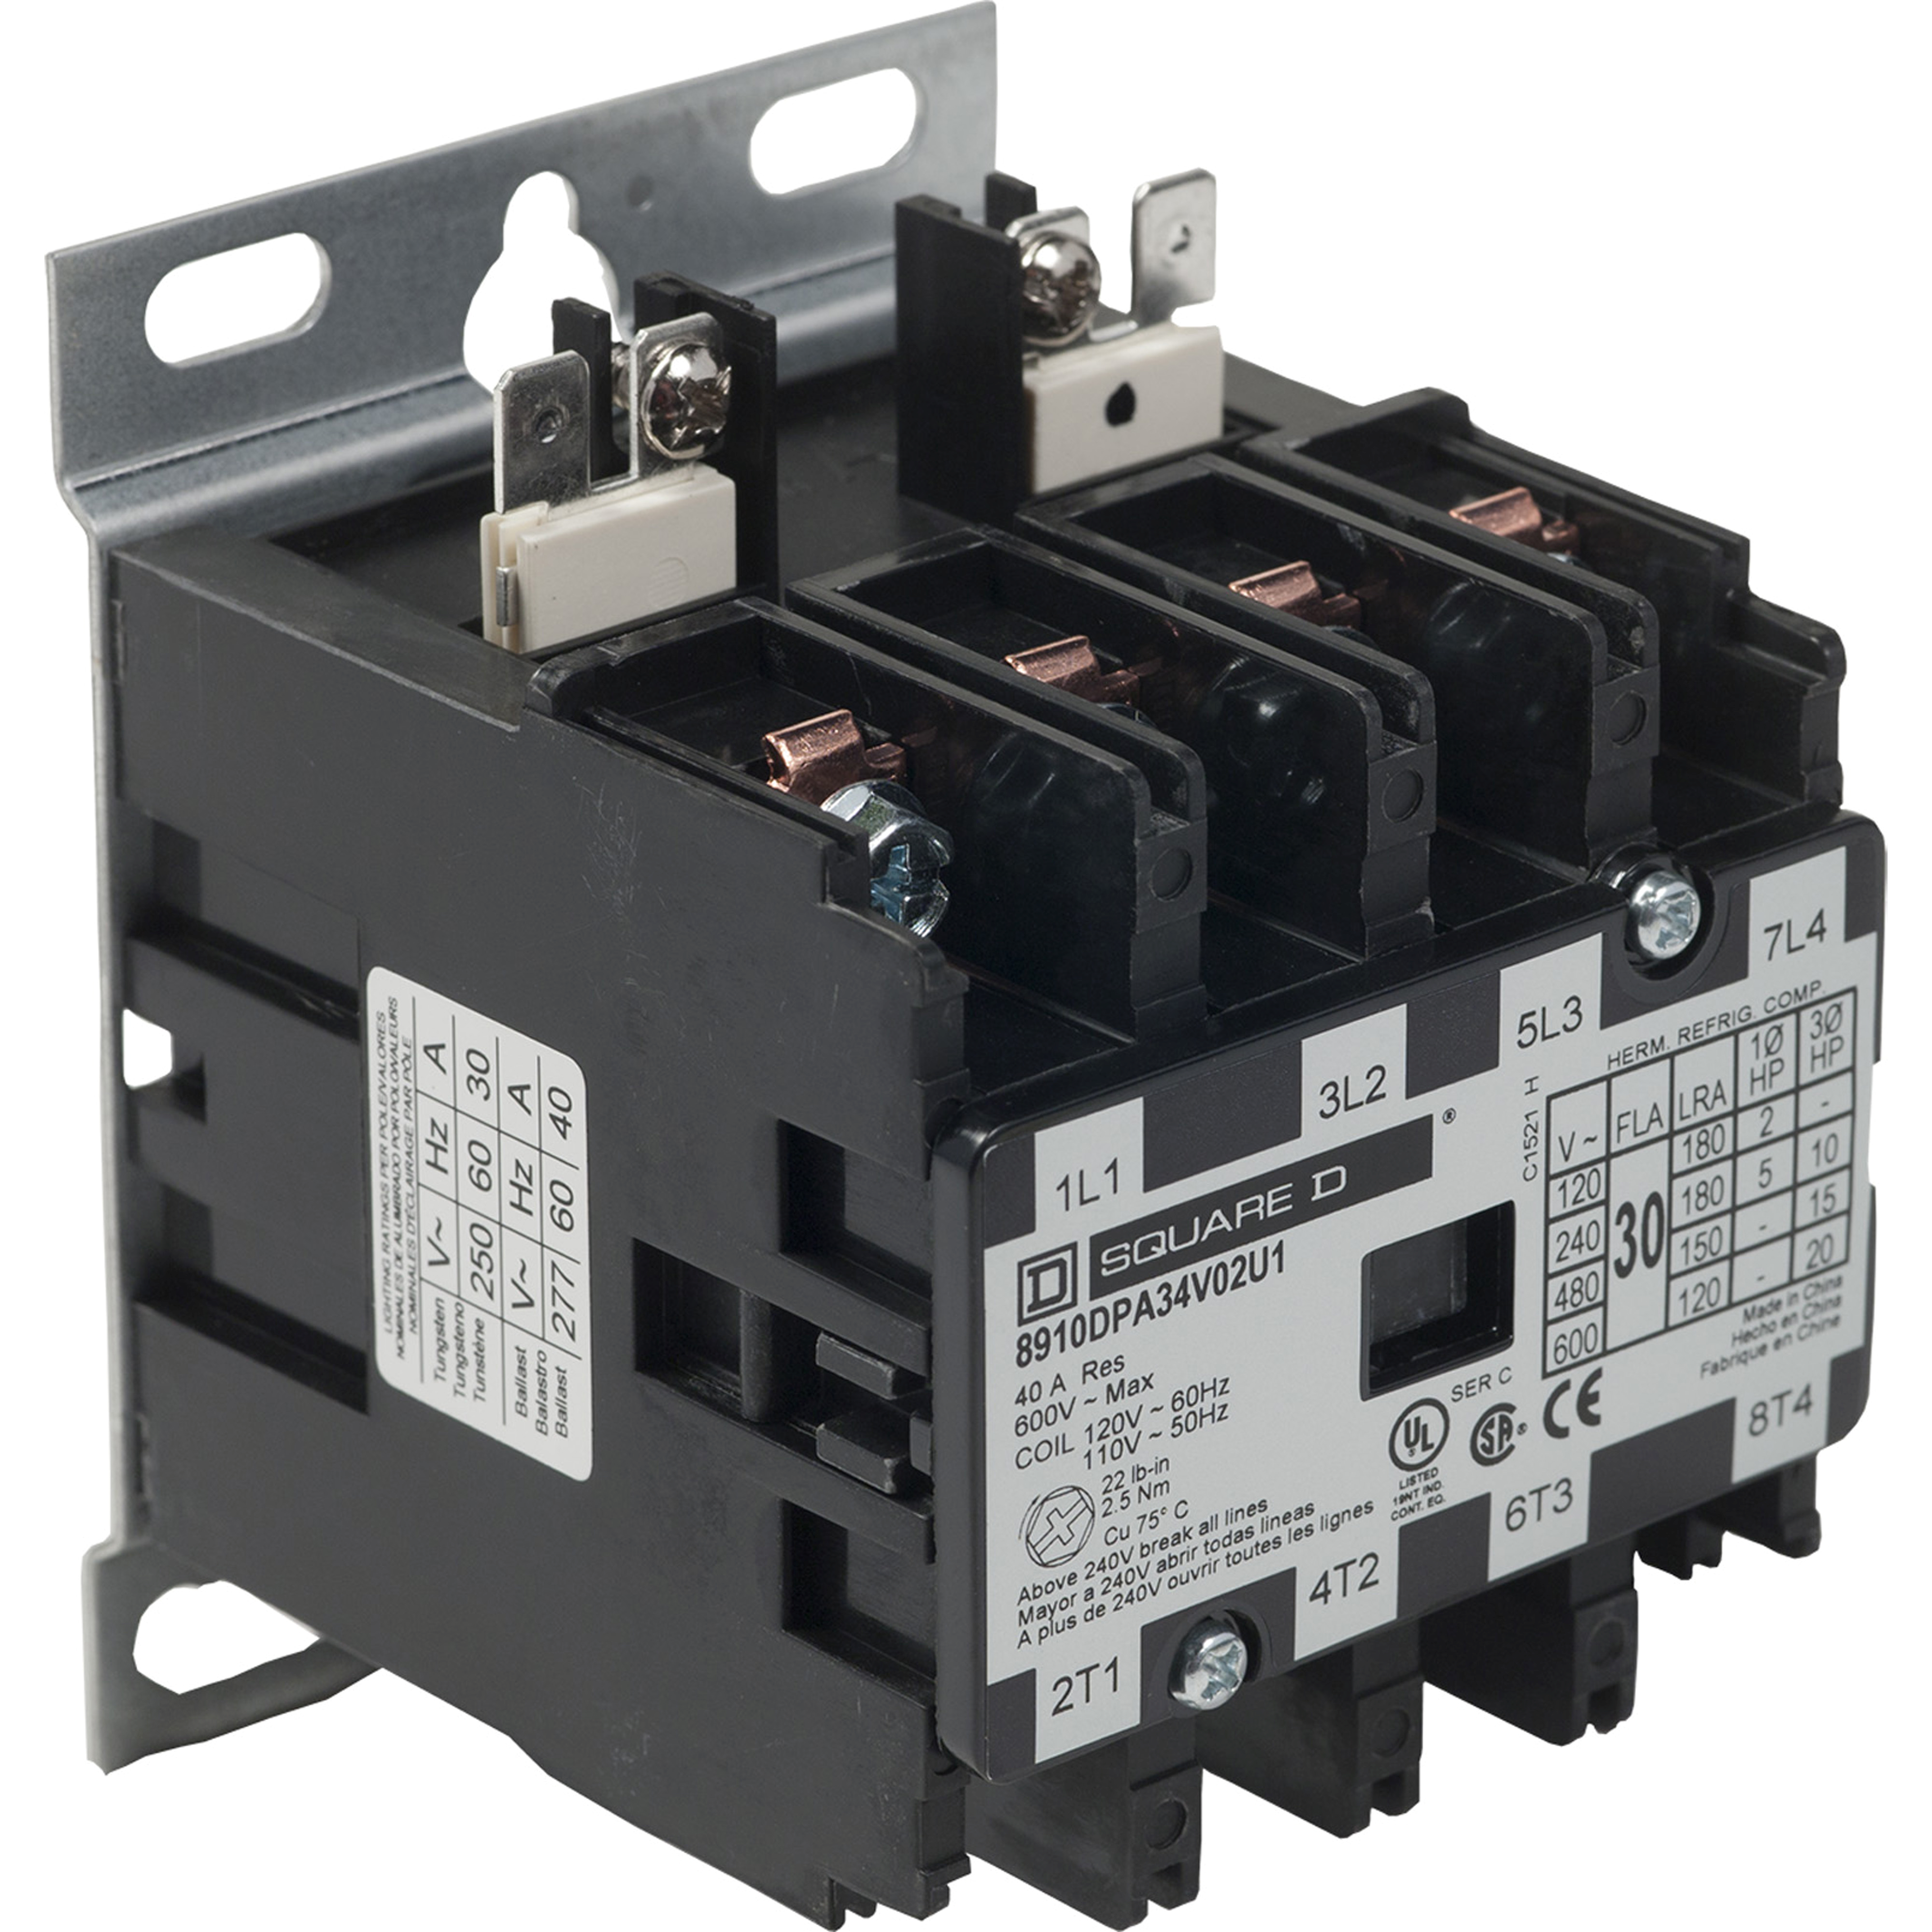 Contactor, Definite Purpose, 30A, 4 pole, 20HP at 575VAC, 3 phase, 110/120VAC 50/60Hz coil, open, UL Listed